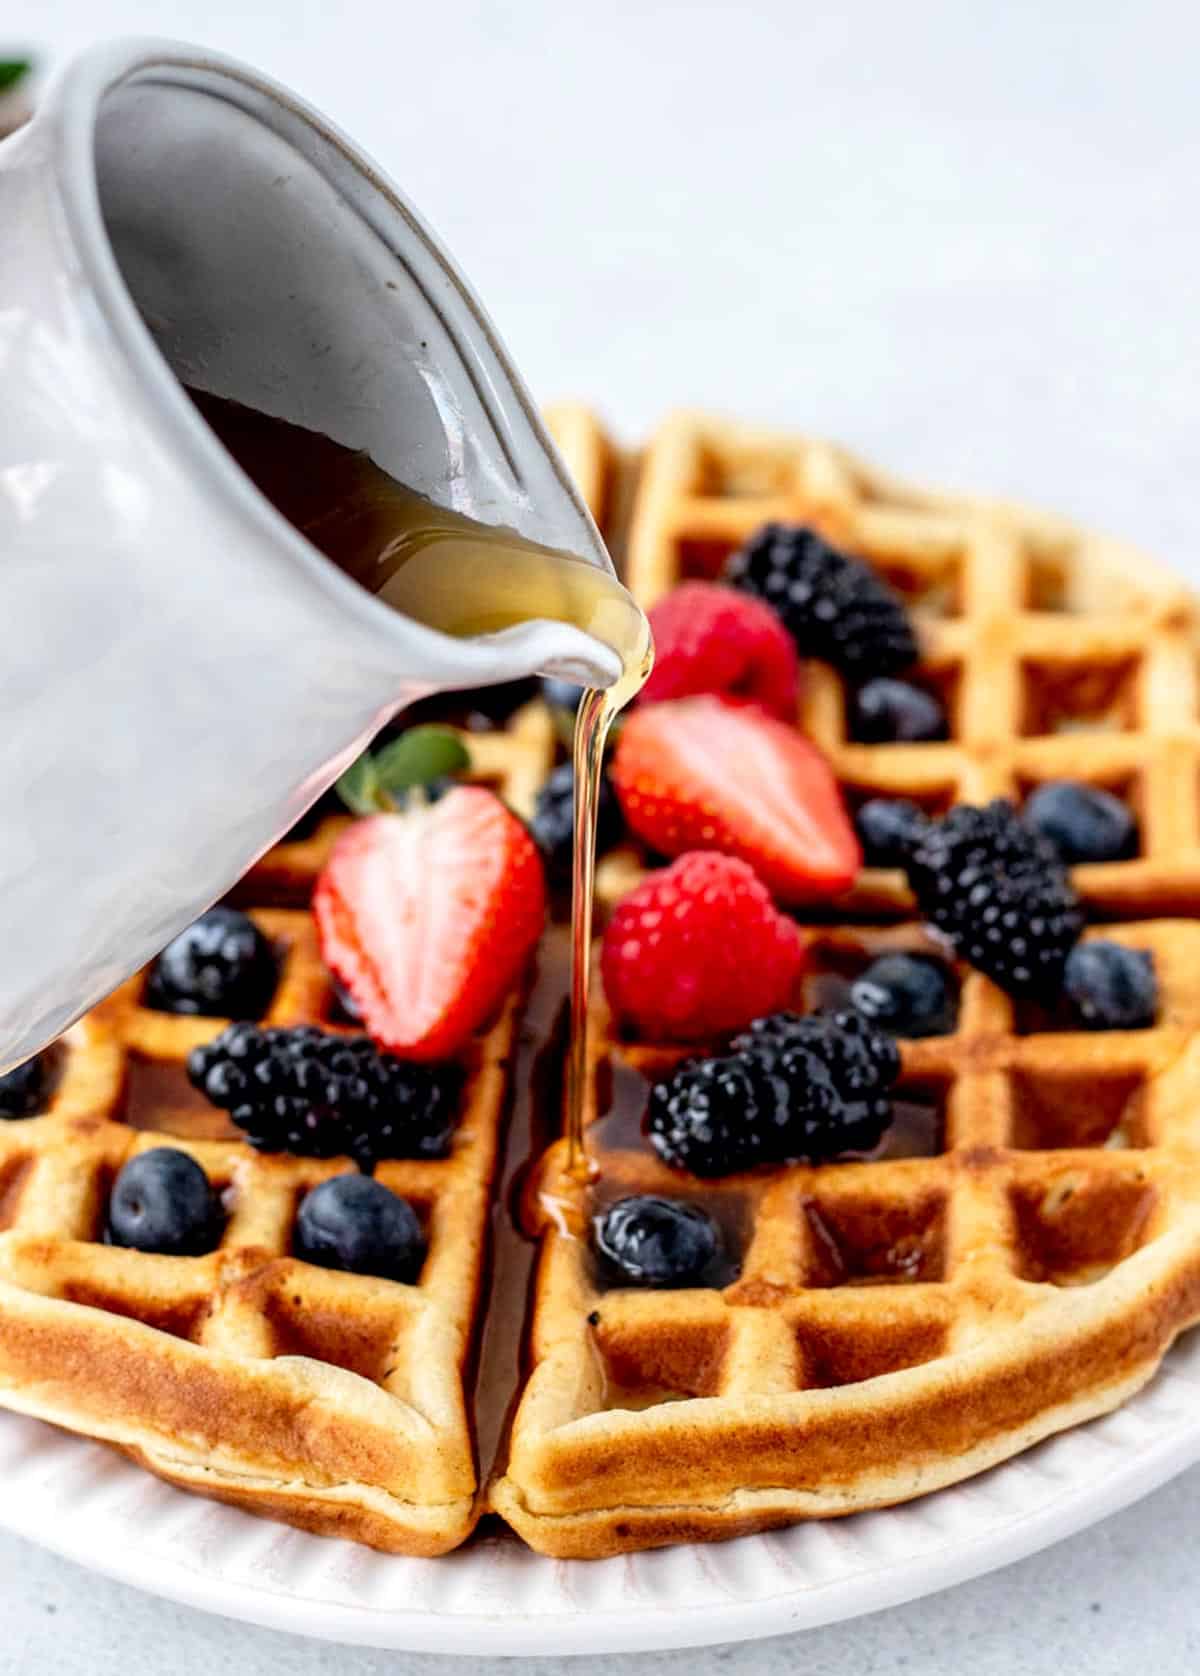 A high protein waffle with blueberries, strawberries and blackberries with maple syrup poured on it.